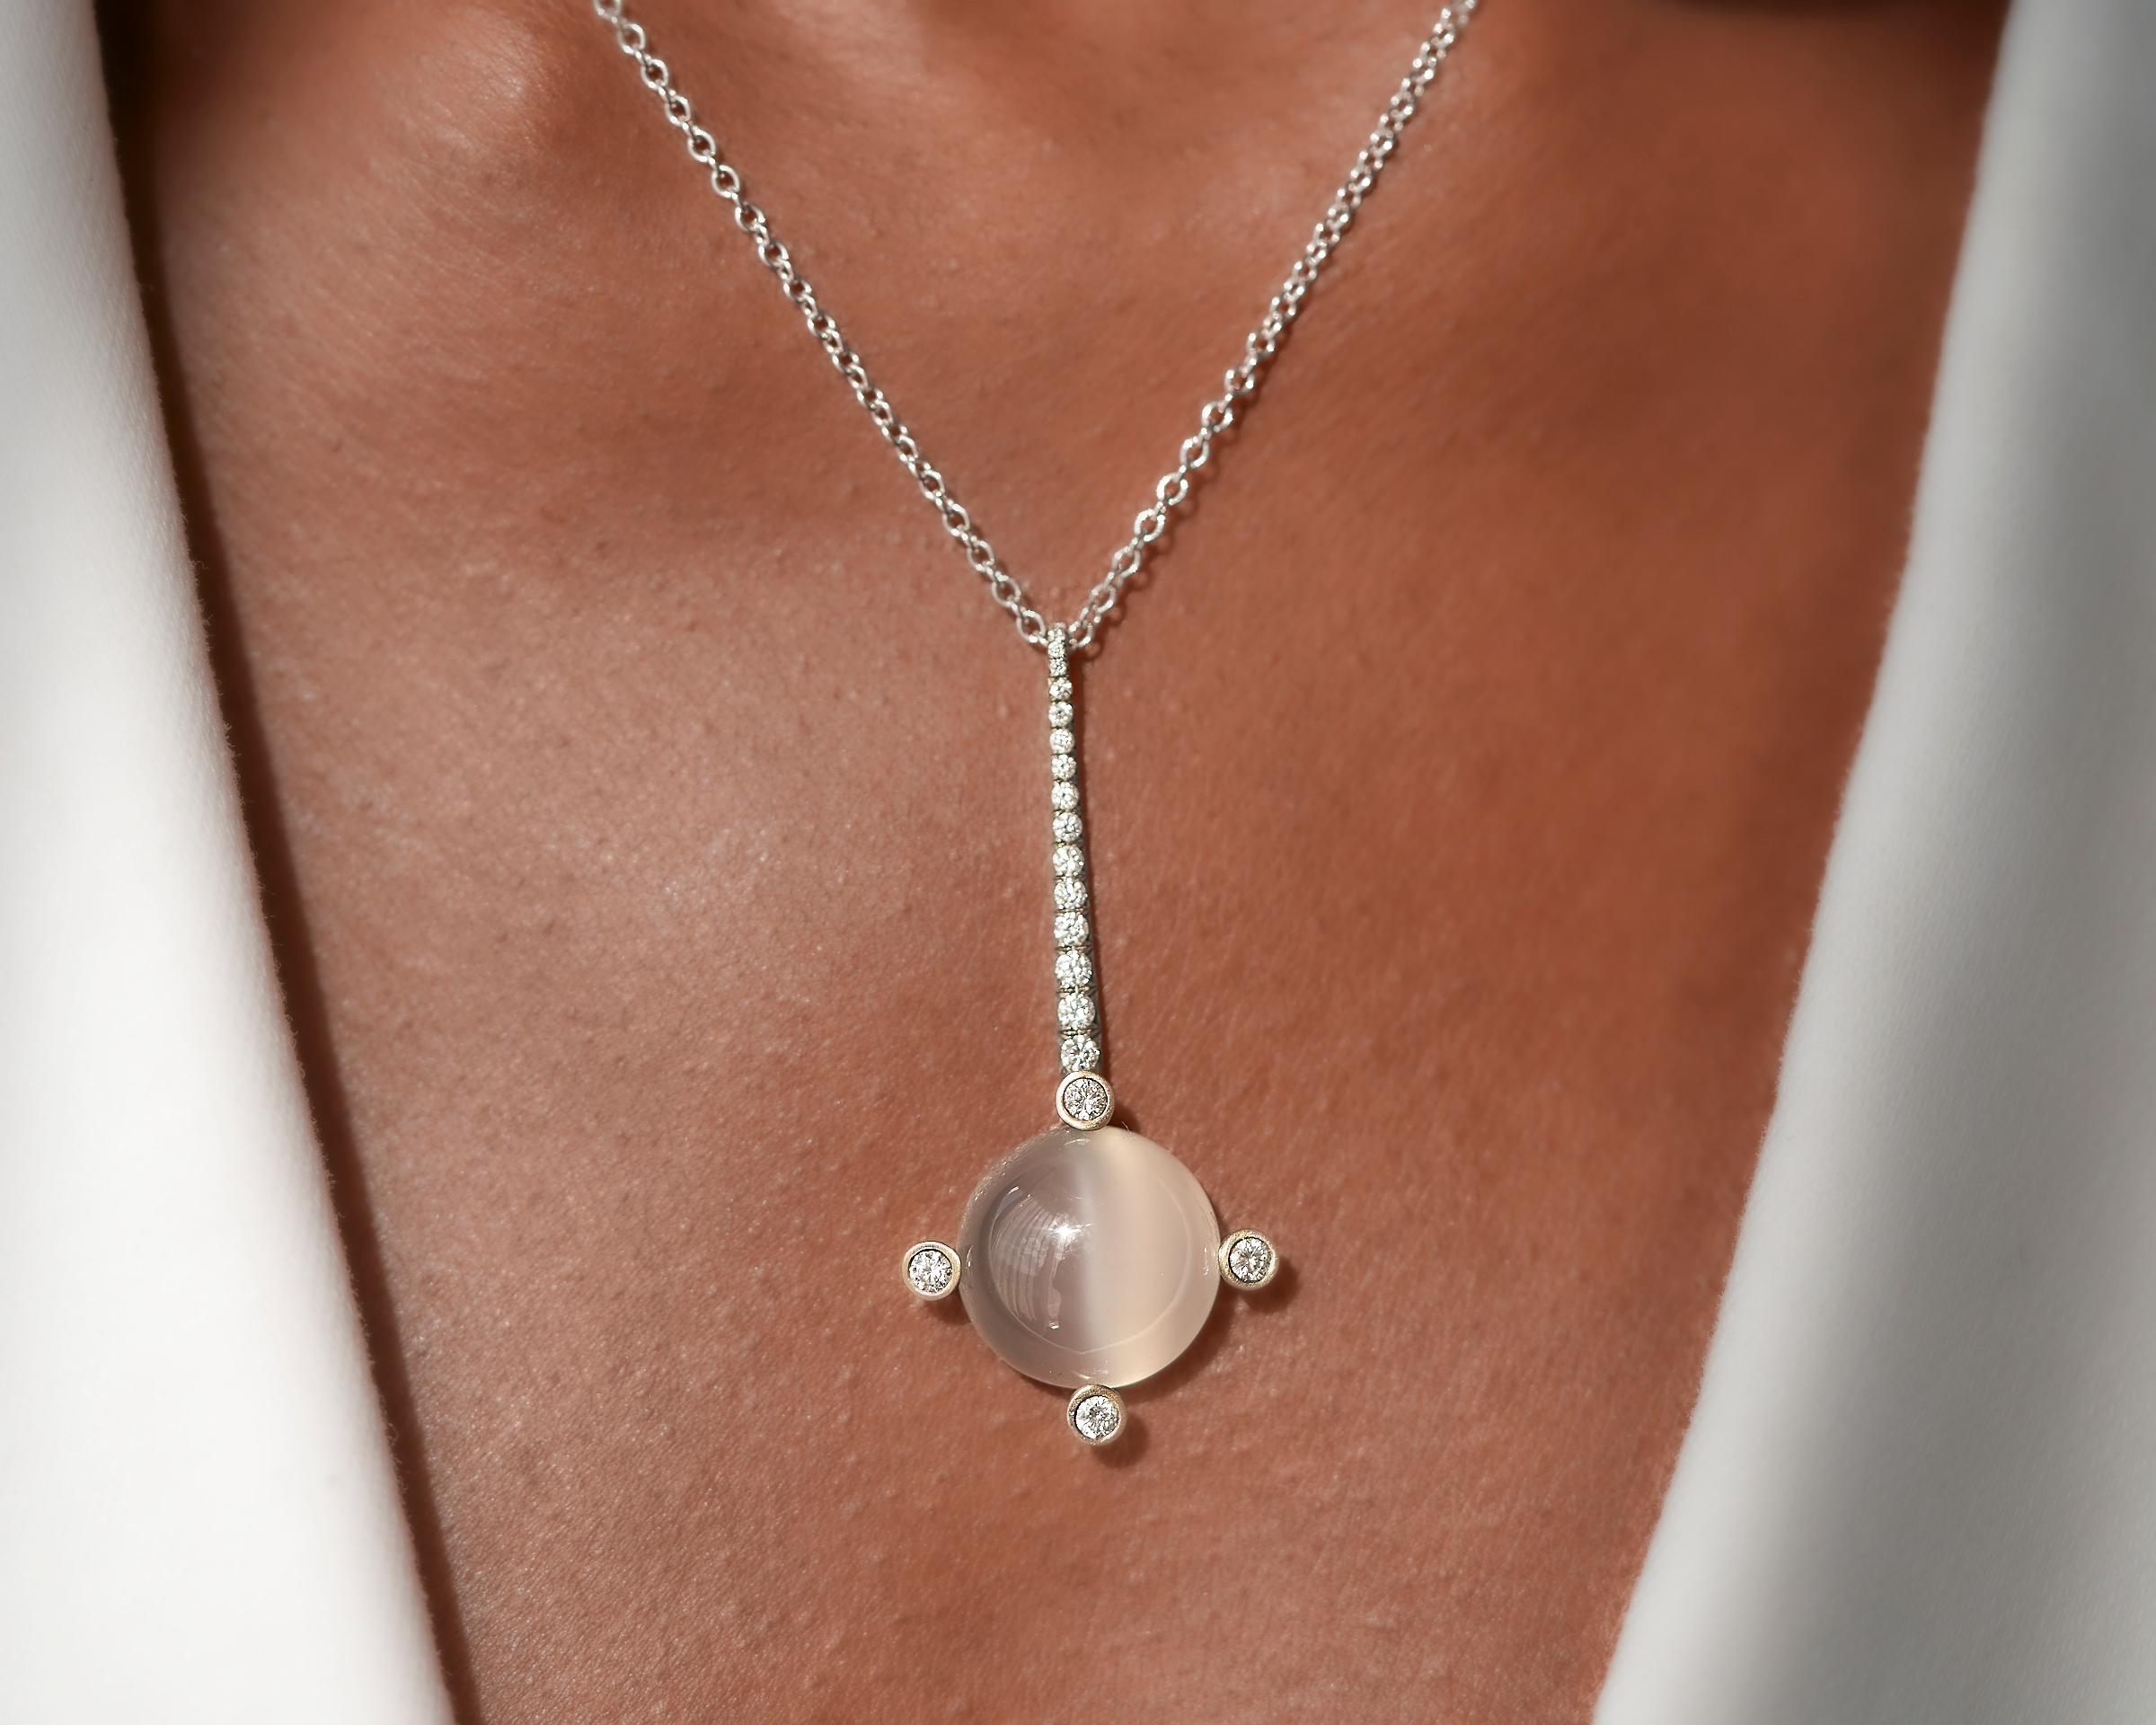 Selene was the Greek goddess of the moon, and the inspiration for this elegant pendant. 

Moonstone.
F/G diamonds, totaling approximately 0.45 carats.
18K white gold.
3/4